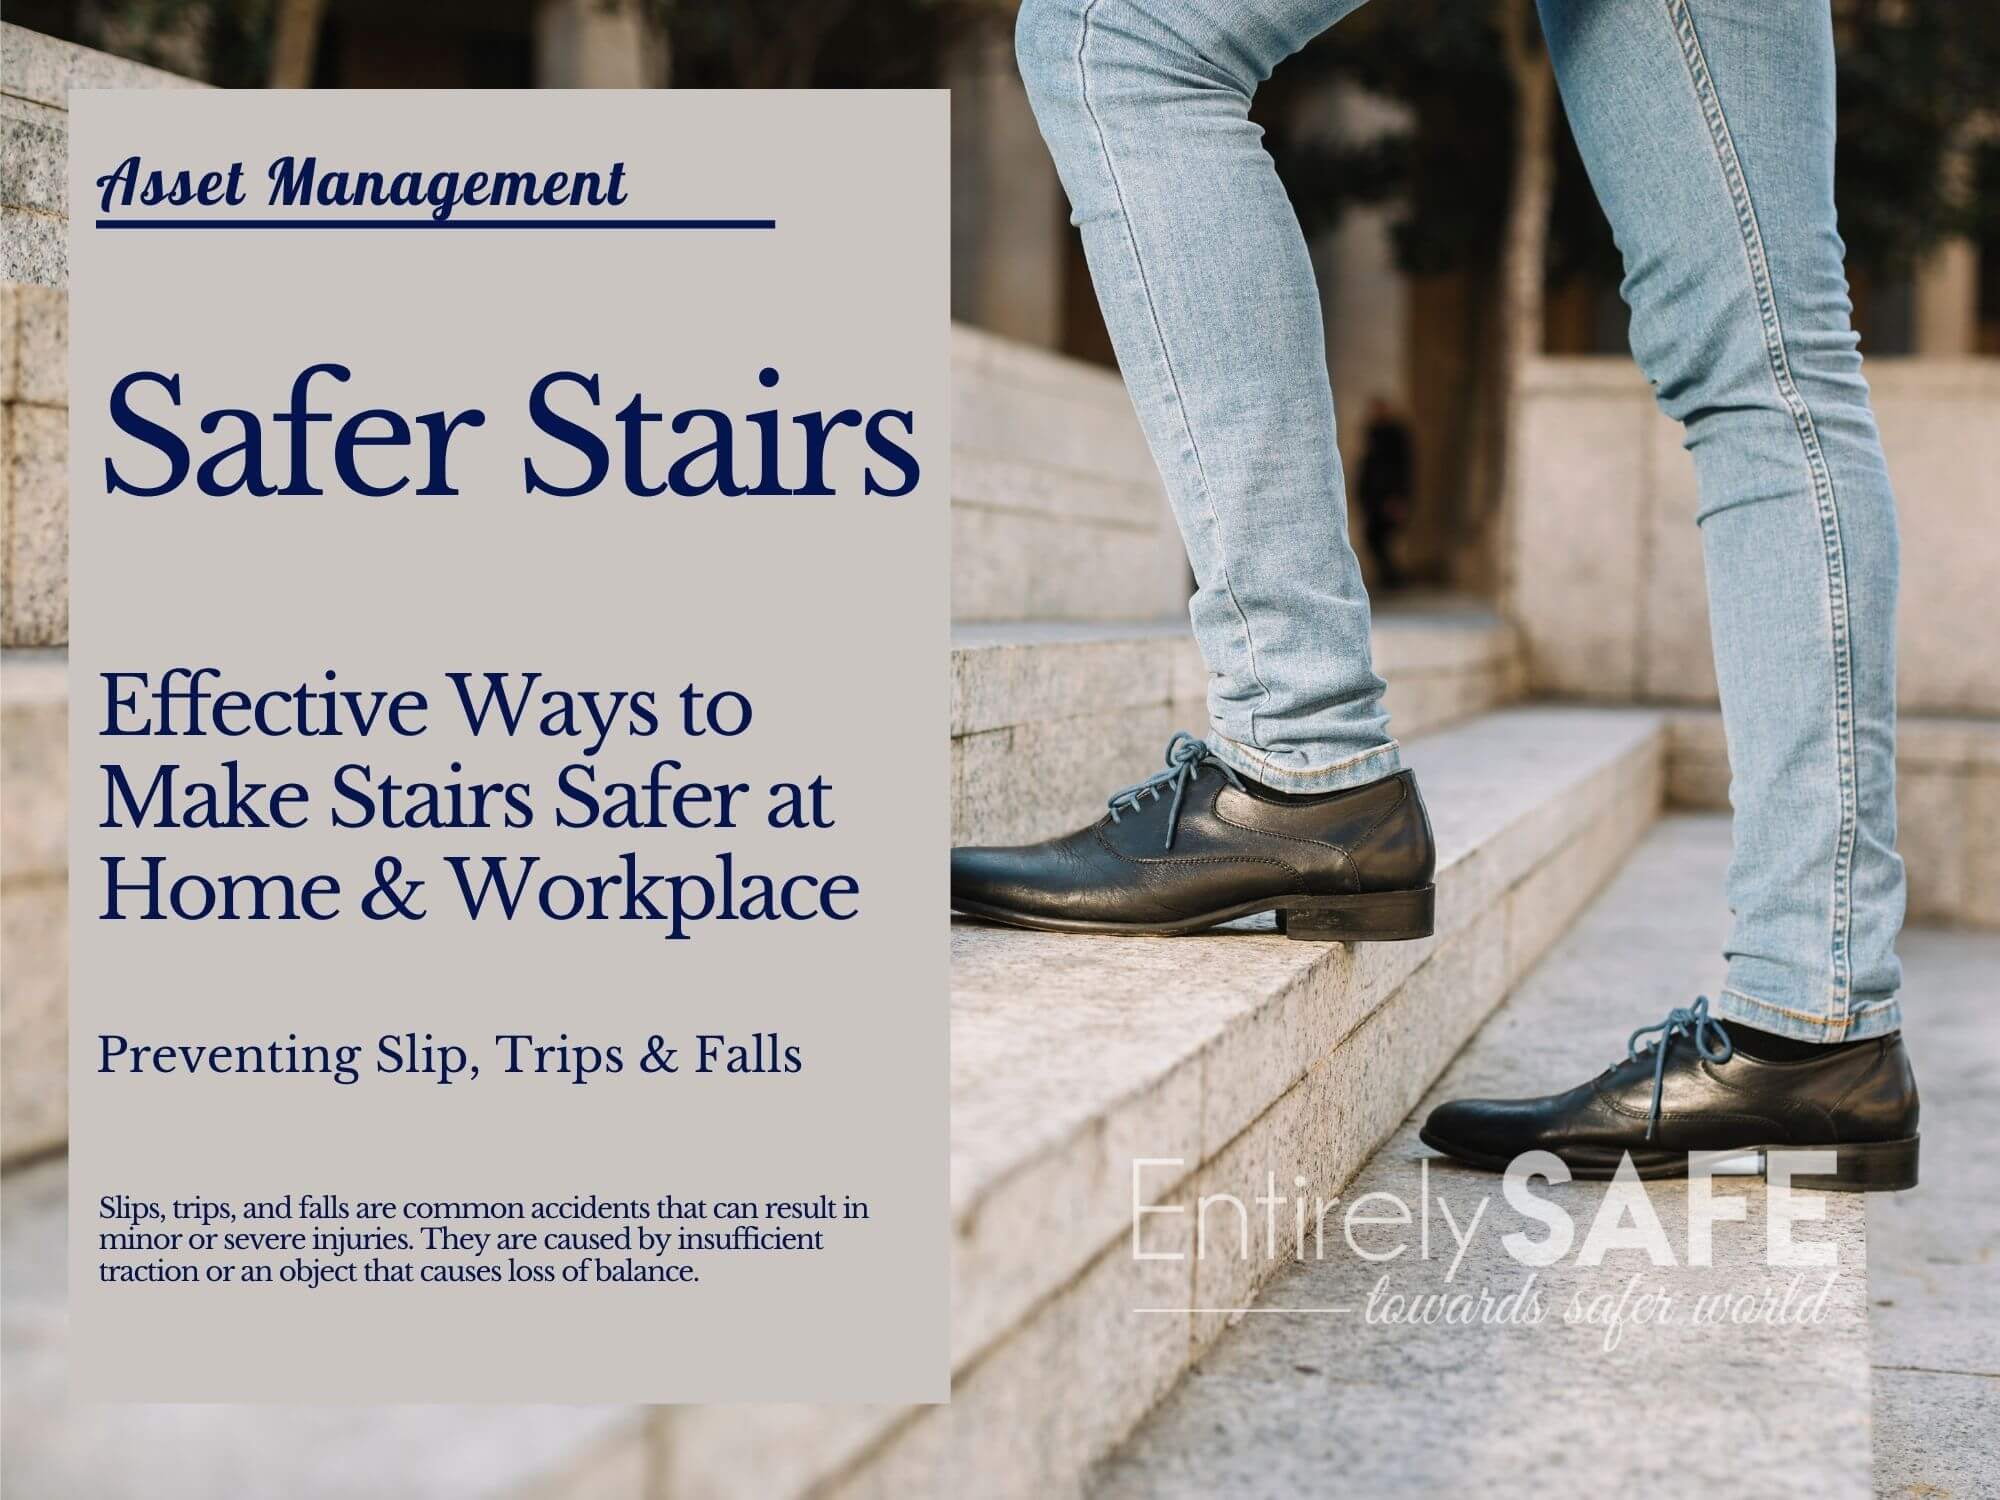 Effective Ways to Make Stairs Safer A Comprehensive Guide for Home, Workplace, and Educational Settings (1)